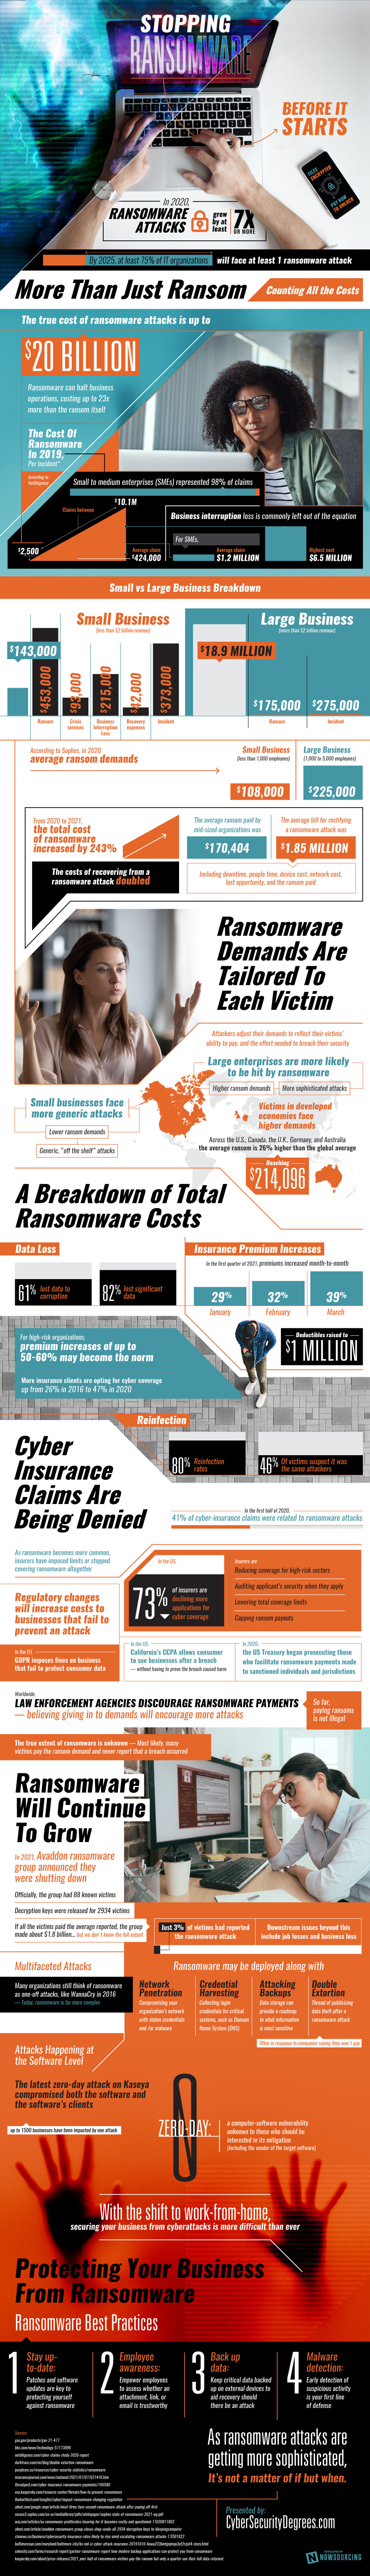 ransomware infographic